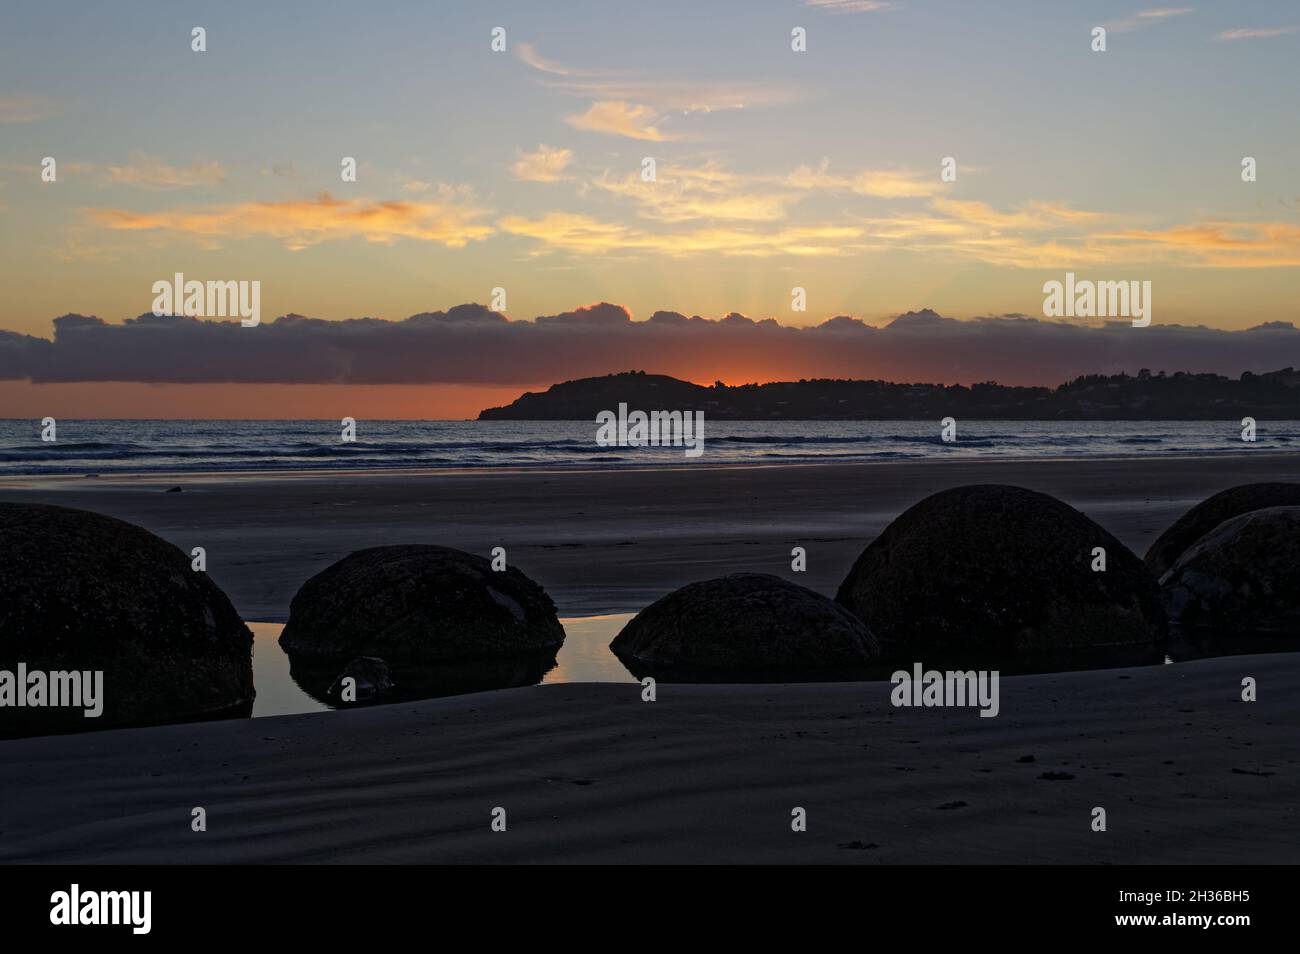 Moeraki Boulders sit in a pool of water on the beach, as the sun comes up, the tide is out. Stock Photo